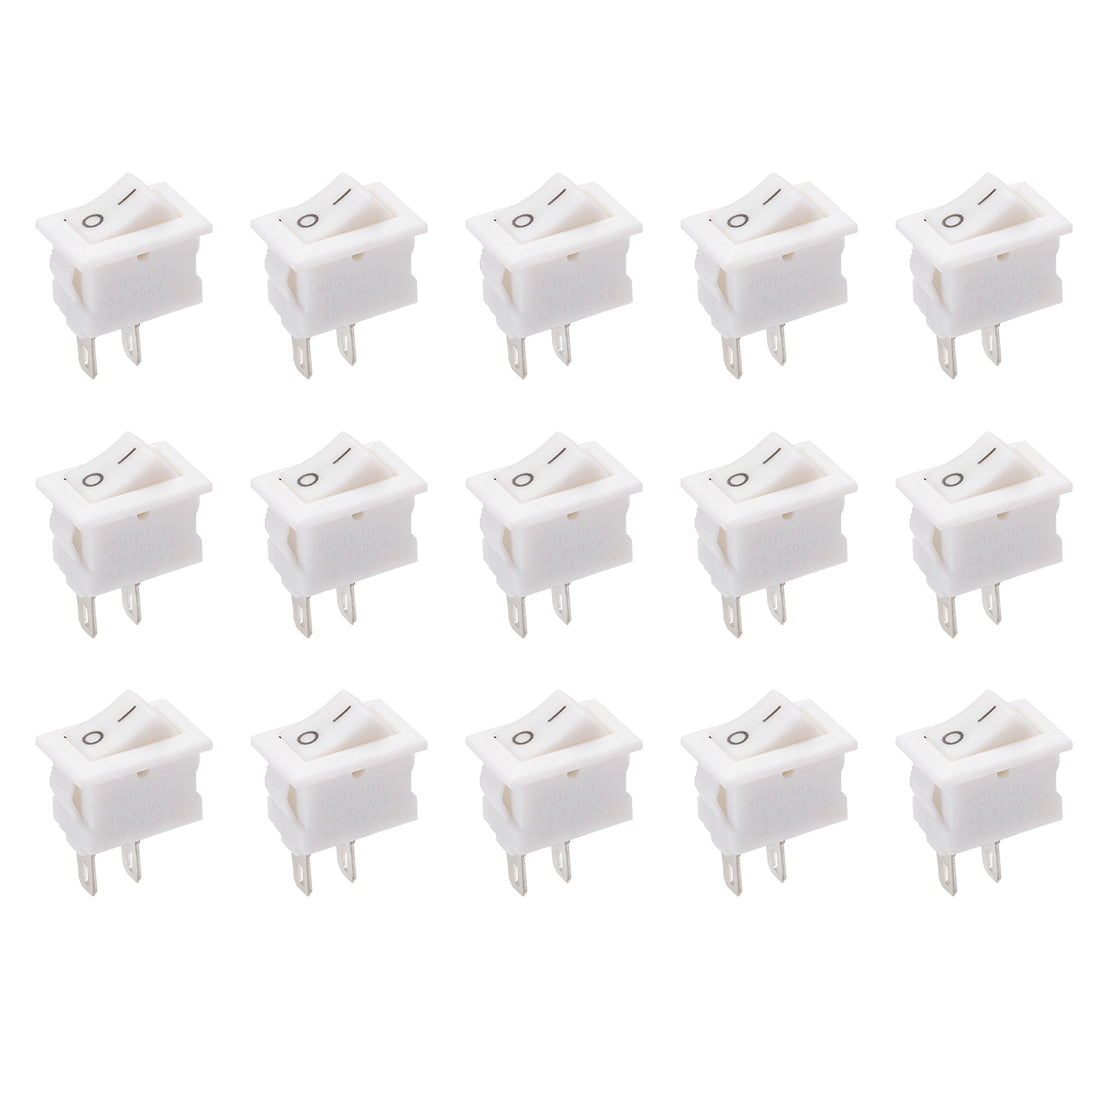 uxcell Uxcell Mini Boat Rocker Switch White Toggle Switch for Boat Car Marine ON/OFF AC 250V/3A 125V/6A 15pcs